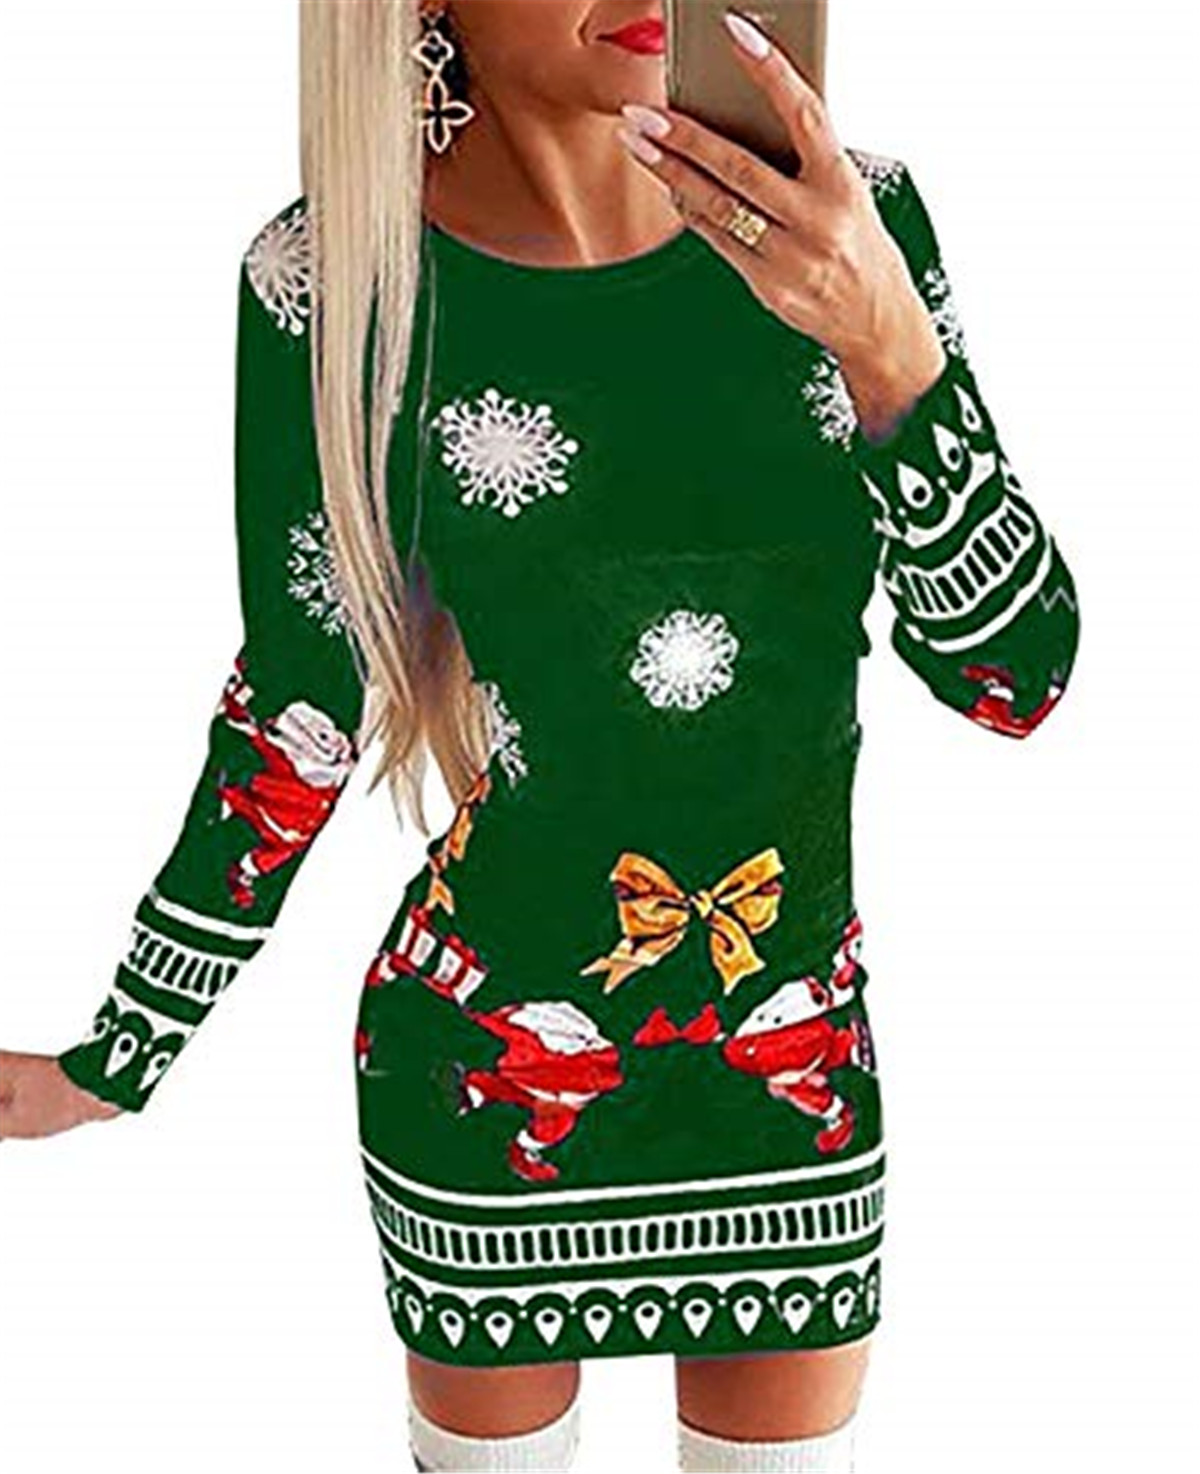 Kiapeise Kiapeise Women Ugly Christmas Sweater Dress Themed Print Long Sleeve Round Neck Dress Fall and Winter Clothes - image 1 of 6